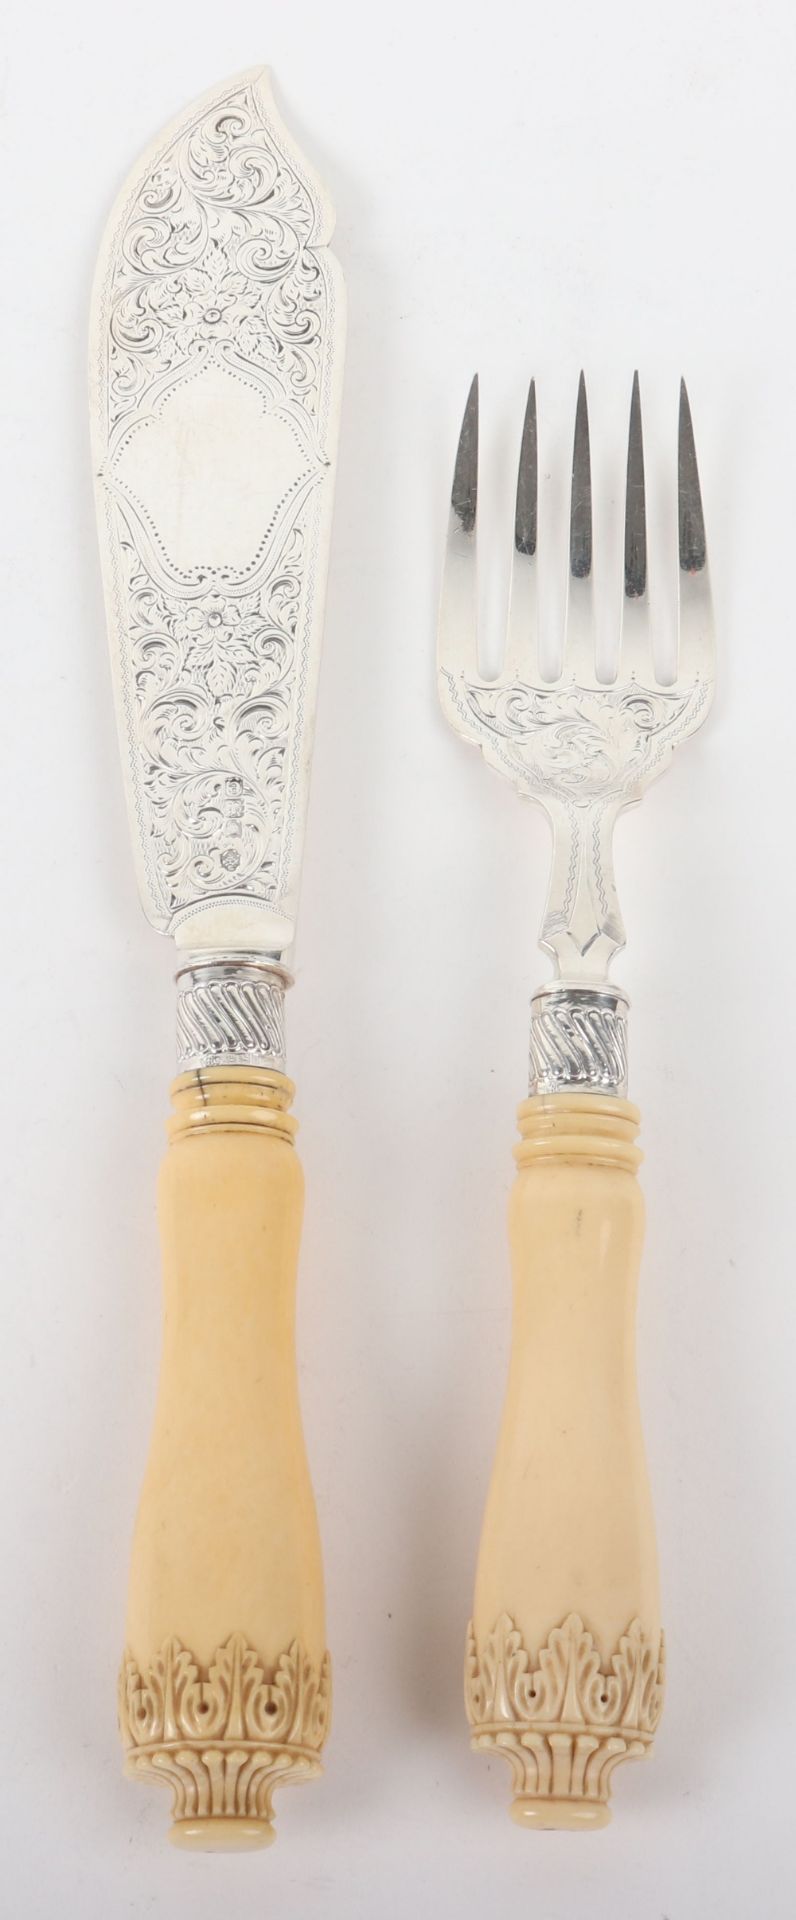 A pair of silver and carved ivory fish servers, William Hutton & Sons, London 1900